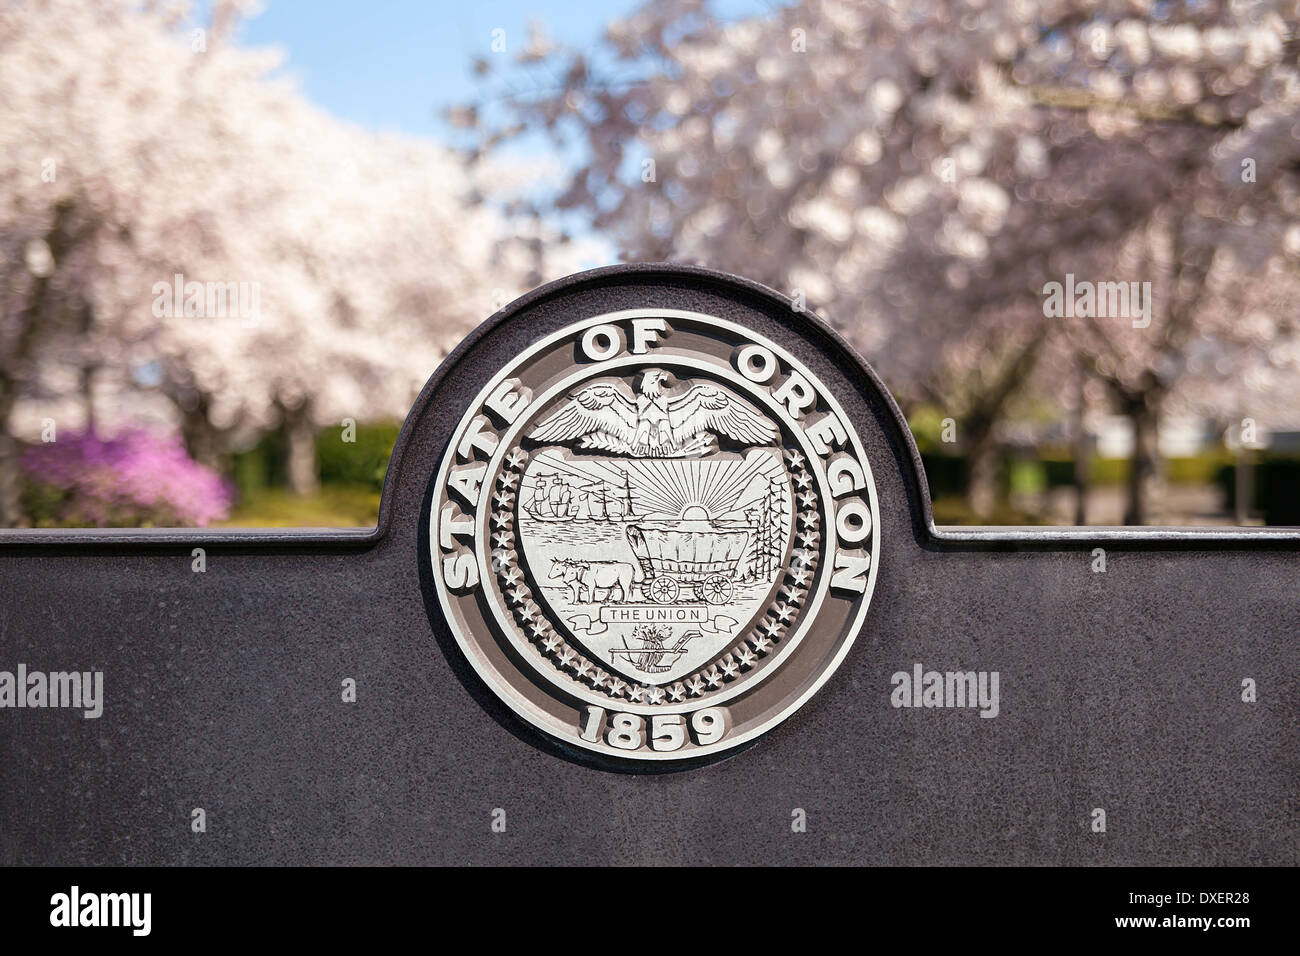 SALEM, OREGON - MARCH 23, 2014: Seal of the State of Oregon Sign at Salem Oregon State Capitol State Park Closeup Stock Photo